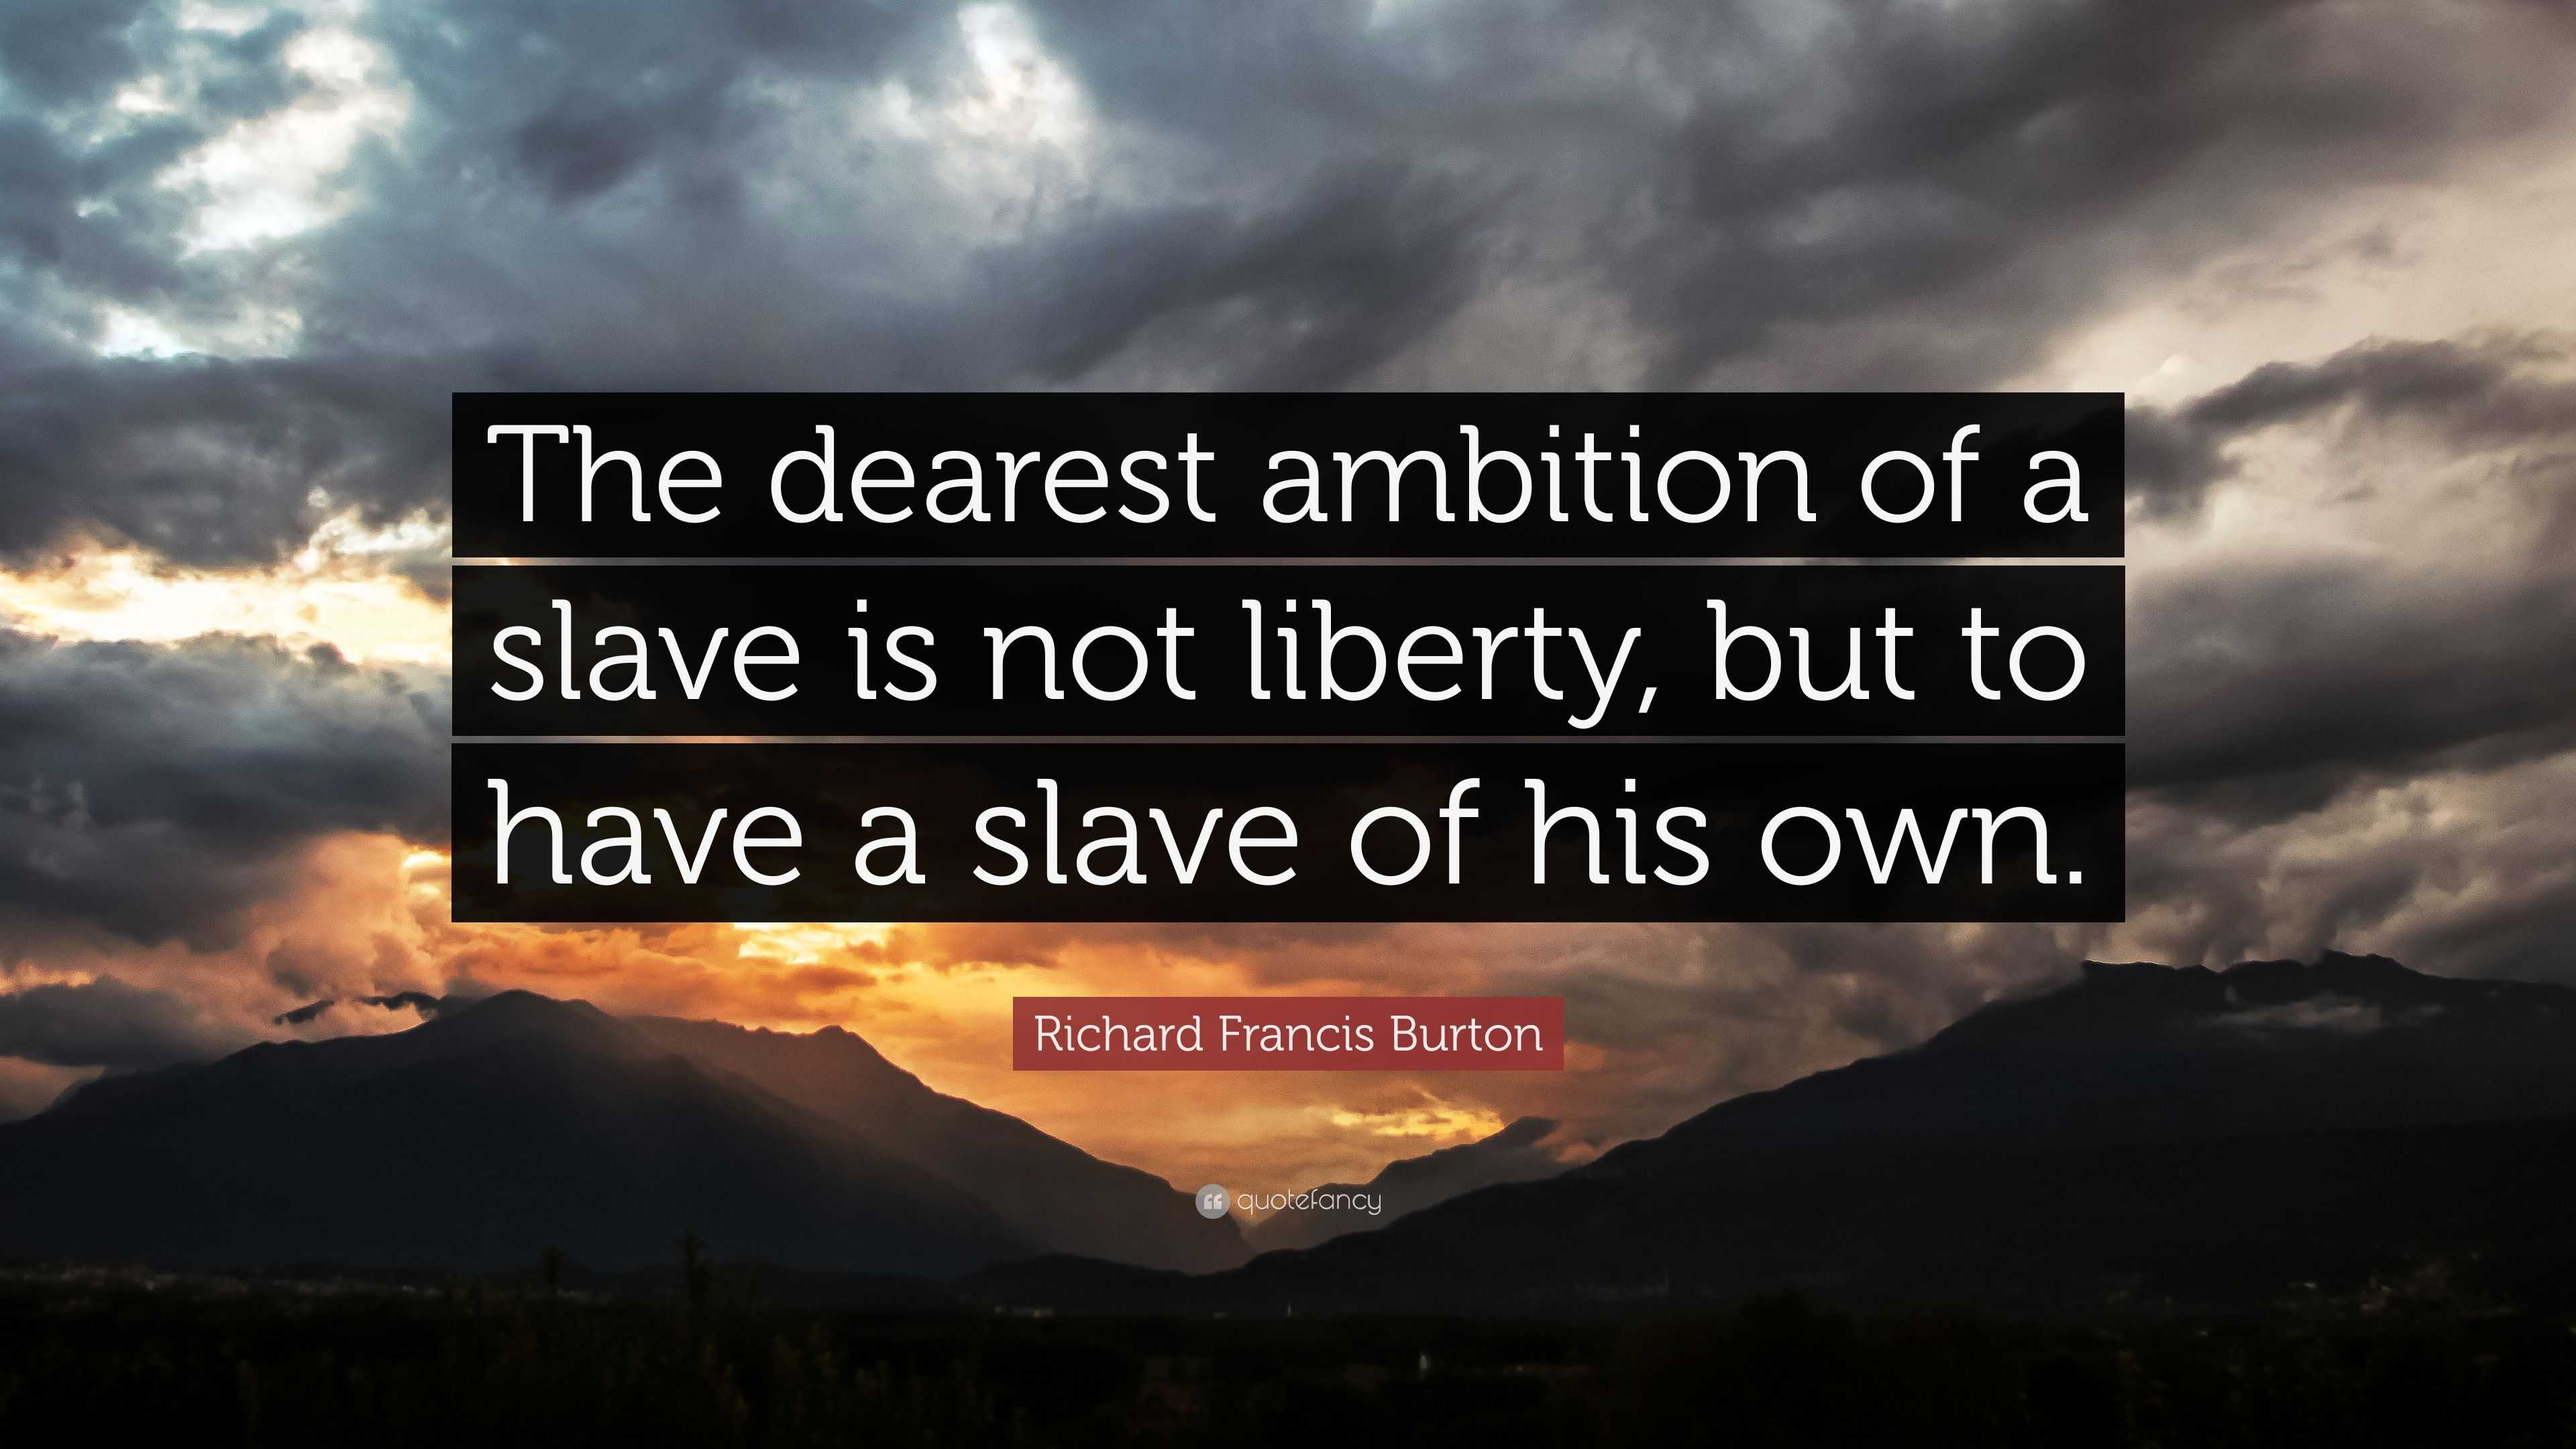 Richard Francis Burton Quote: “The dearest ambition of a slave is not ...